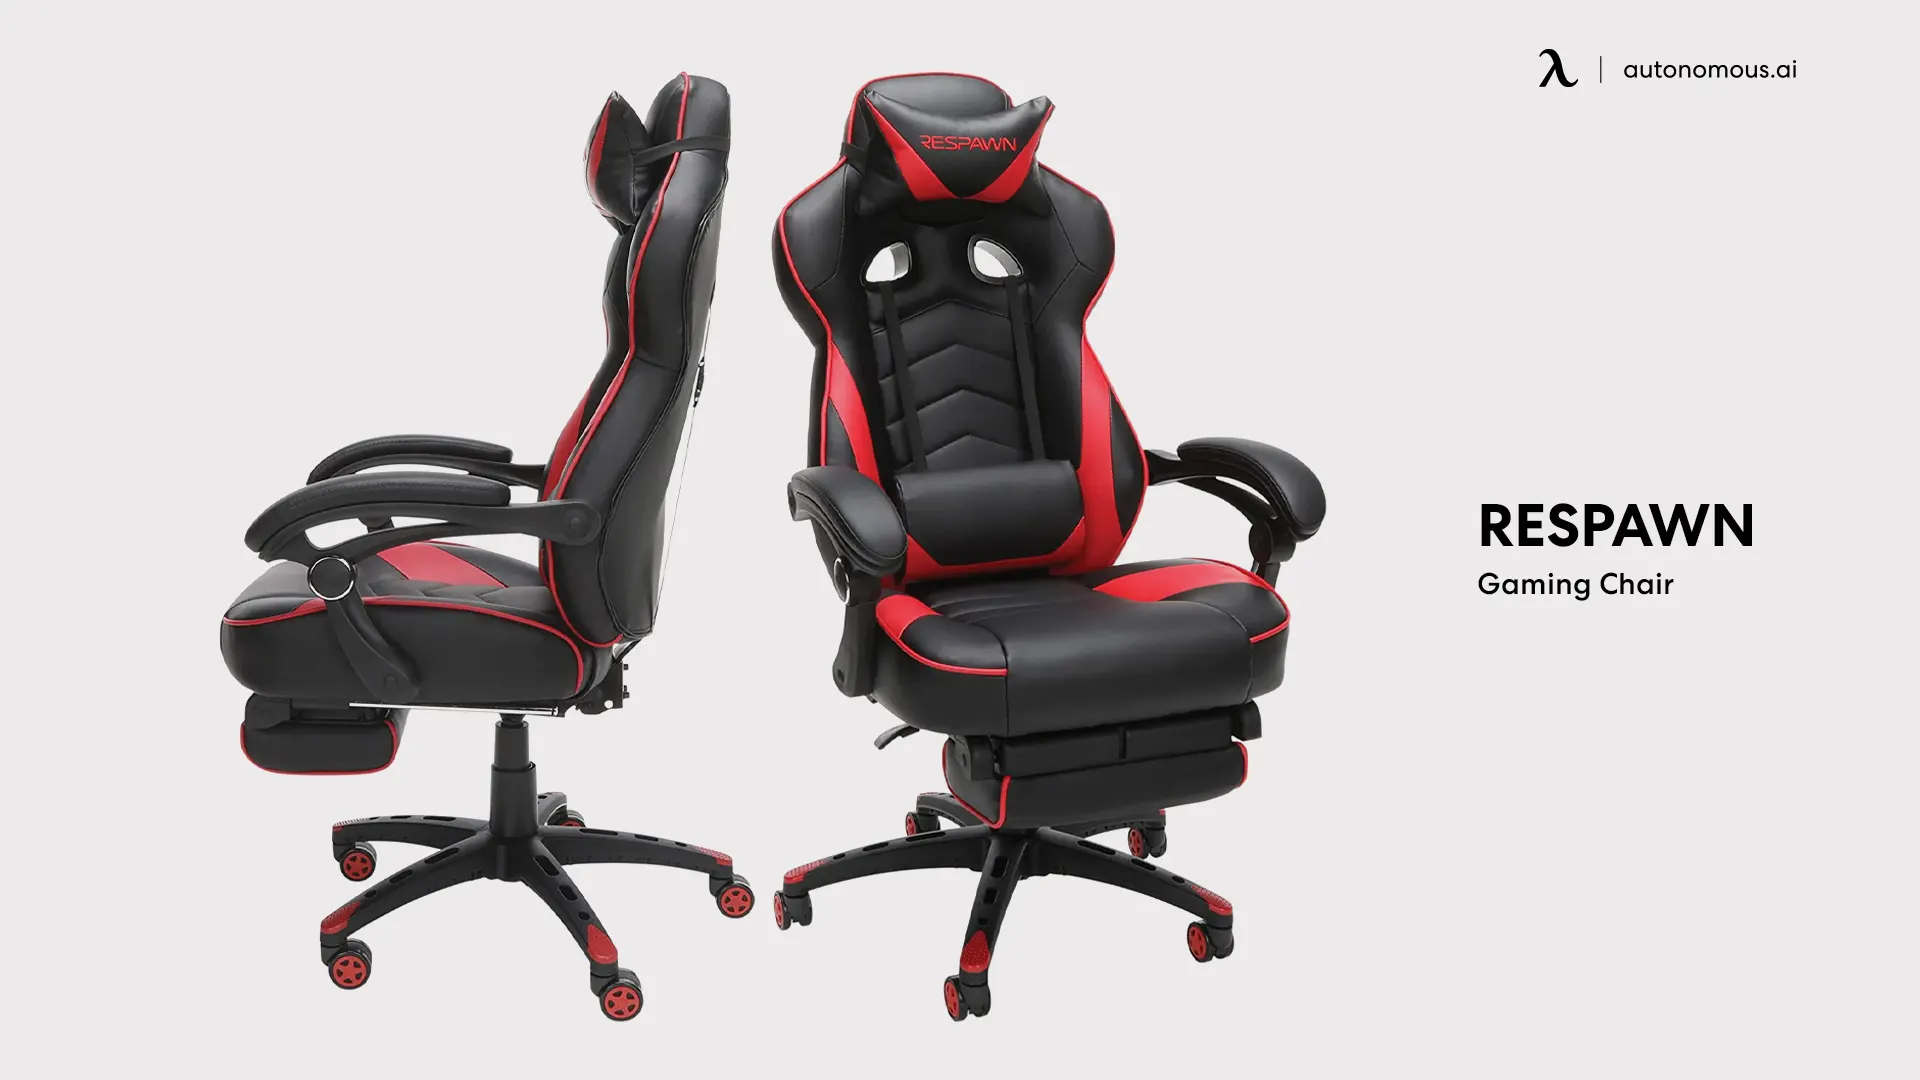 RESPAWN Gaming Chair - red gaming chair